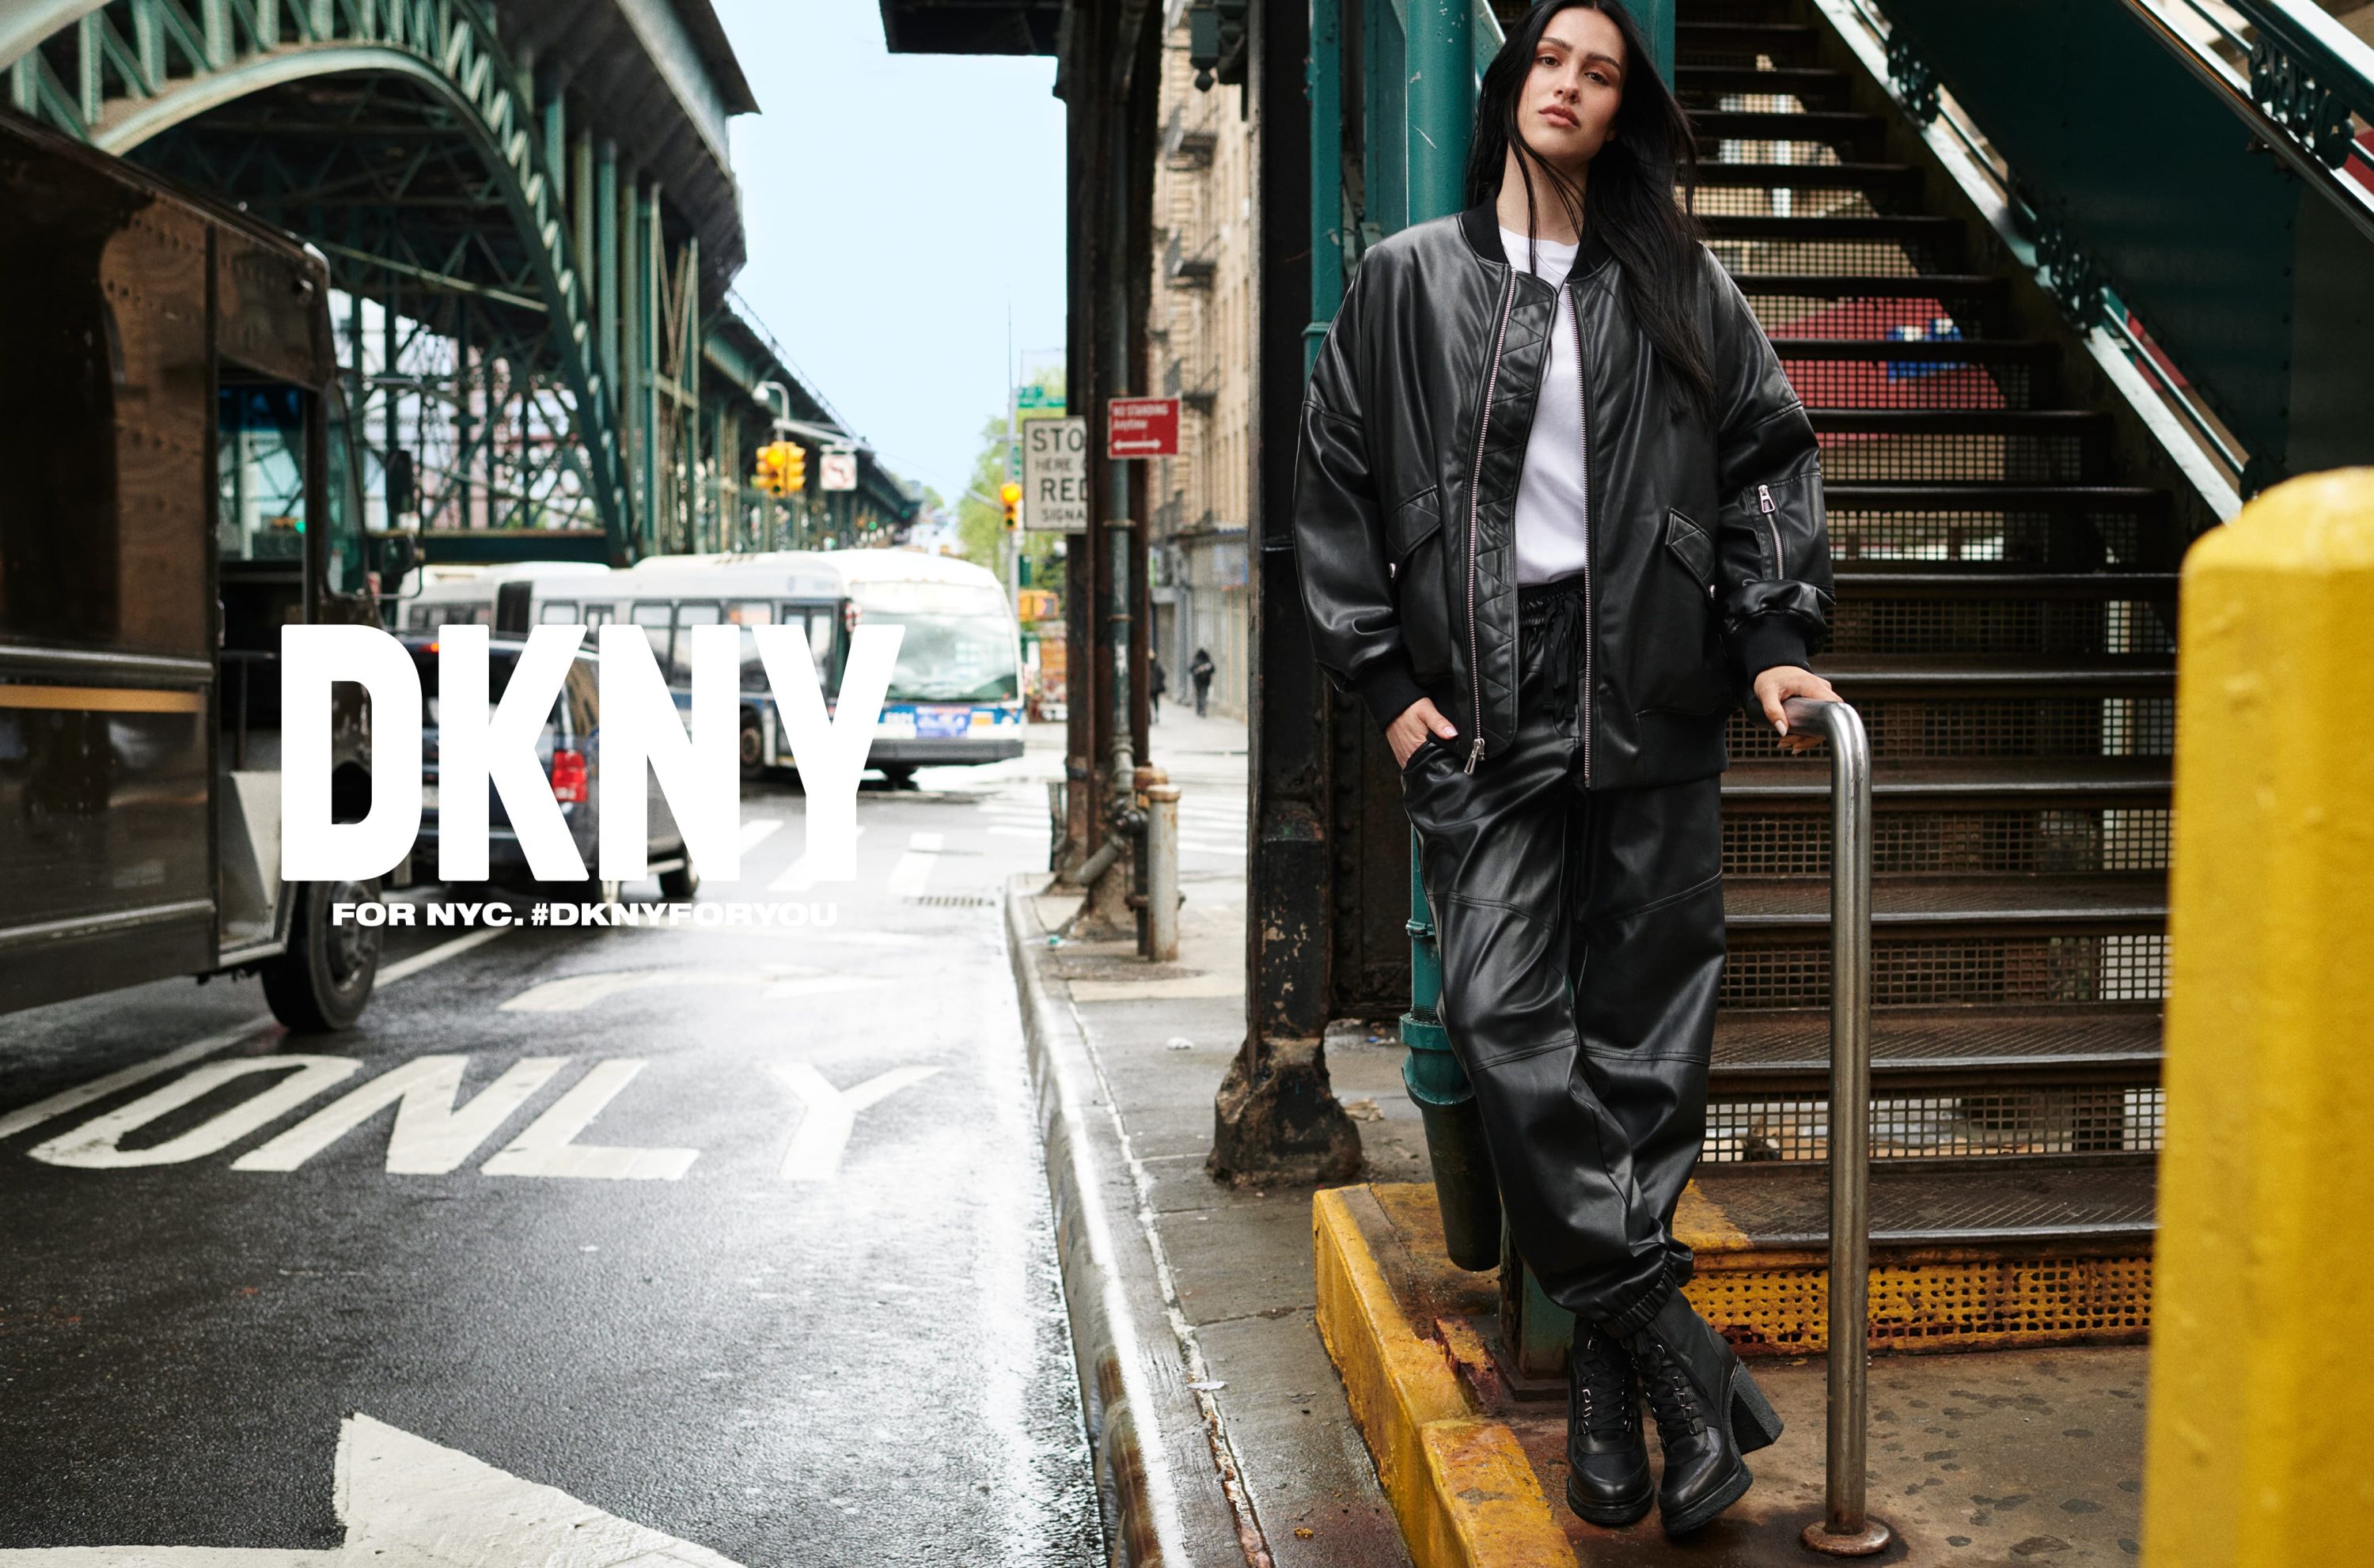 DKNY's Fall Campaign Reveals the New York City as Source of